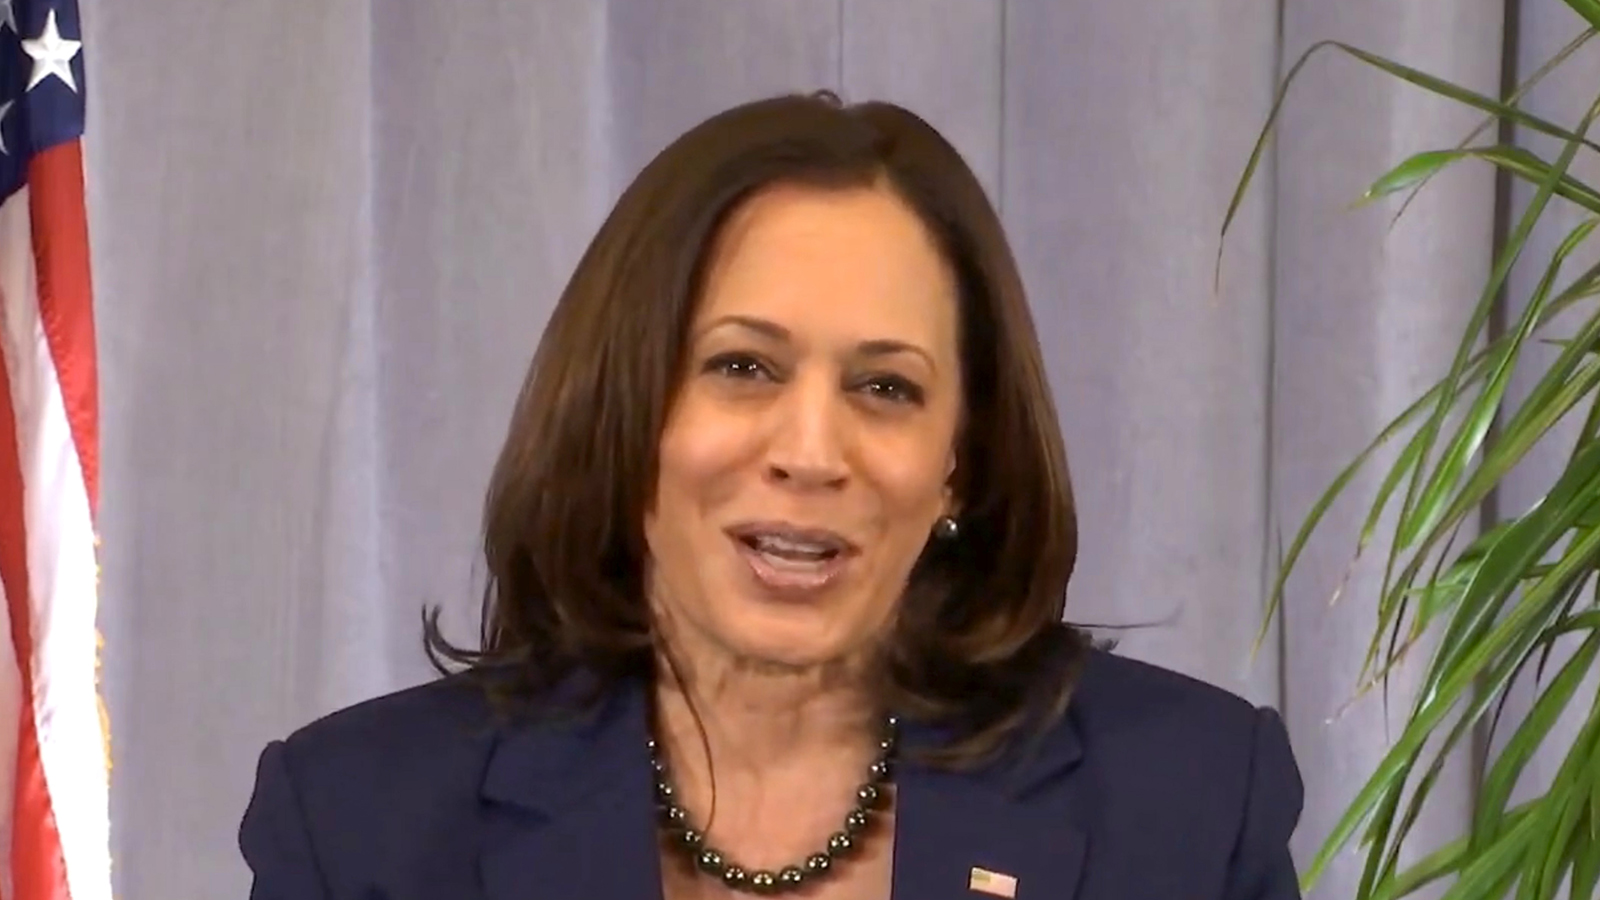 In this screengrab, Vice Presient-Elect Kamala Harris speaks during the "We Are One" celebration hosted by the Biden Inaugural Committee on January 19.